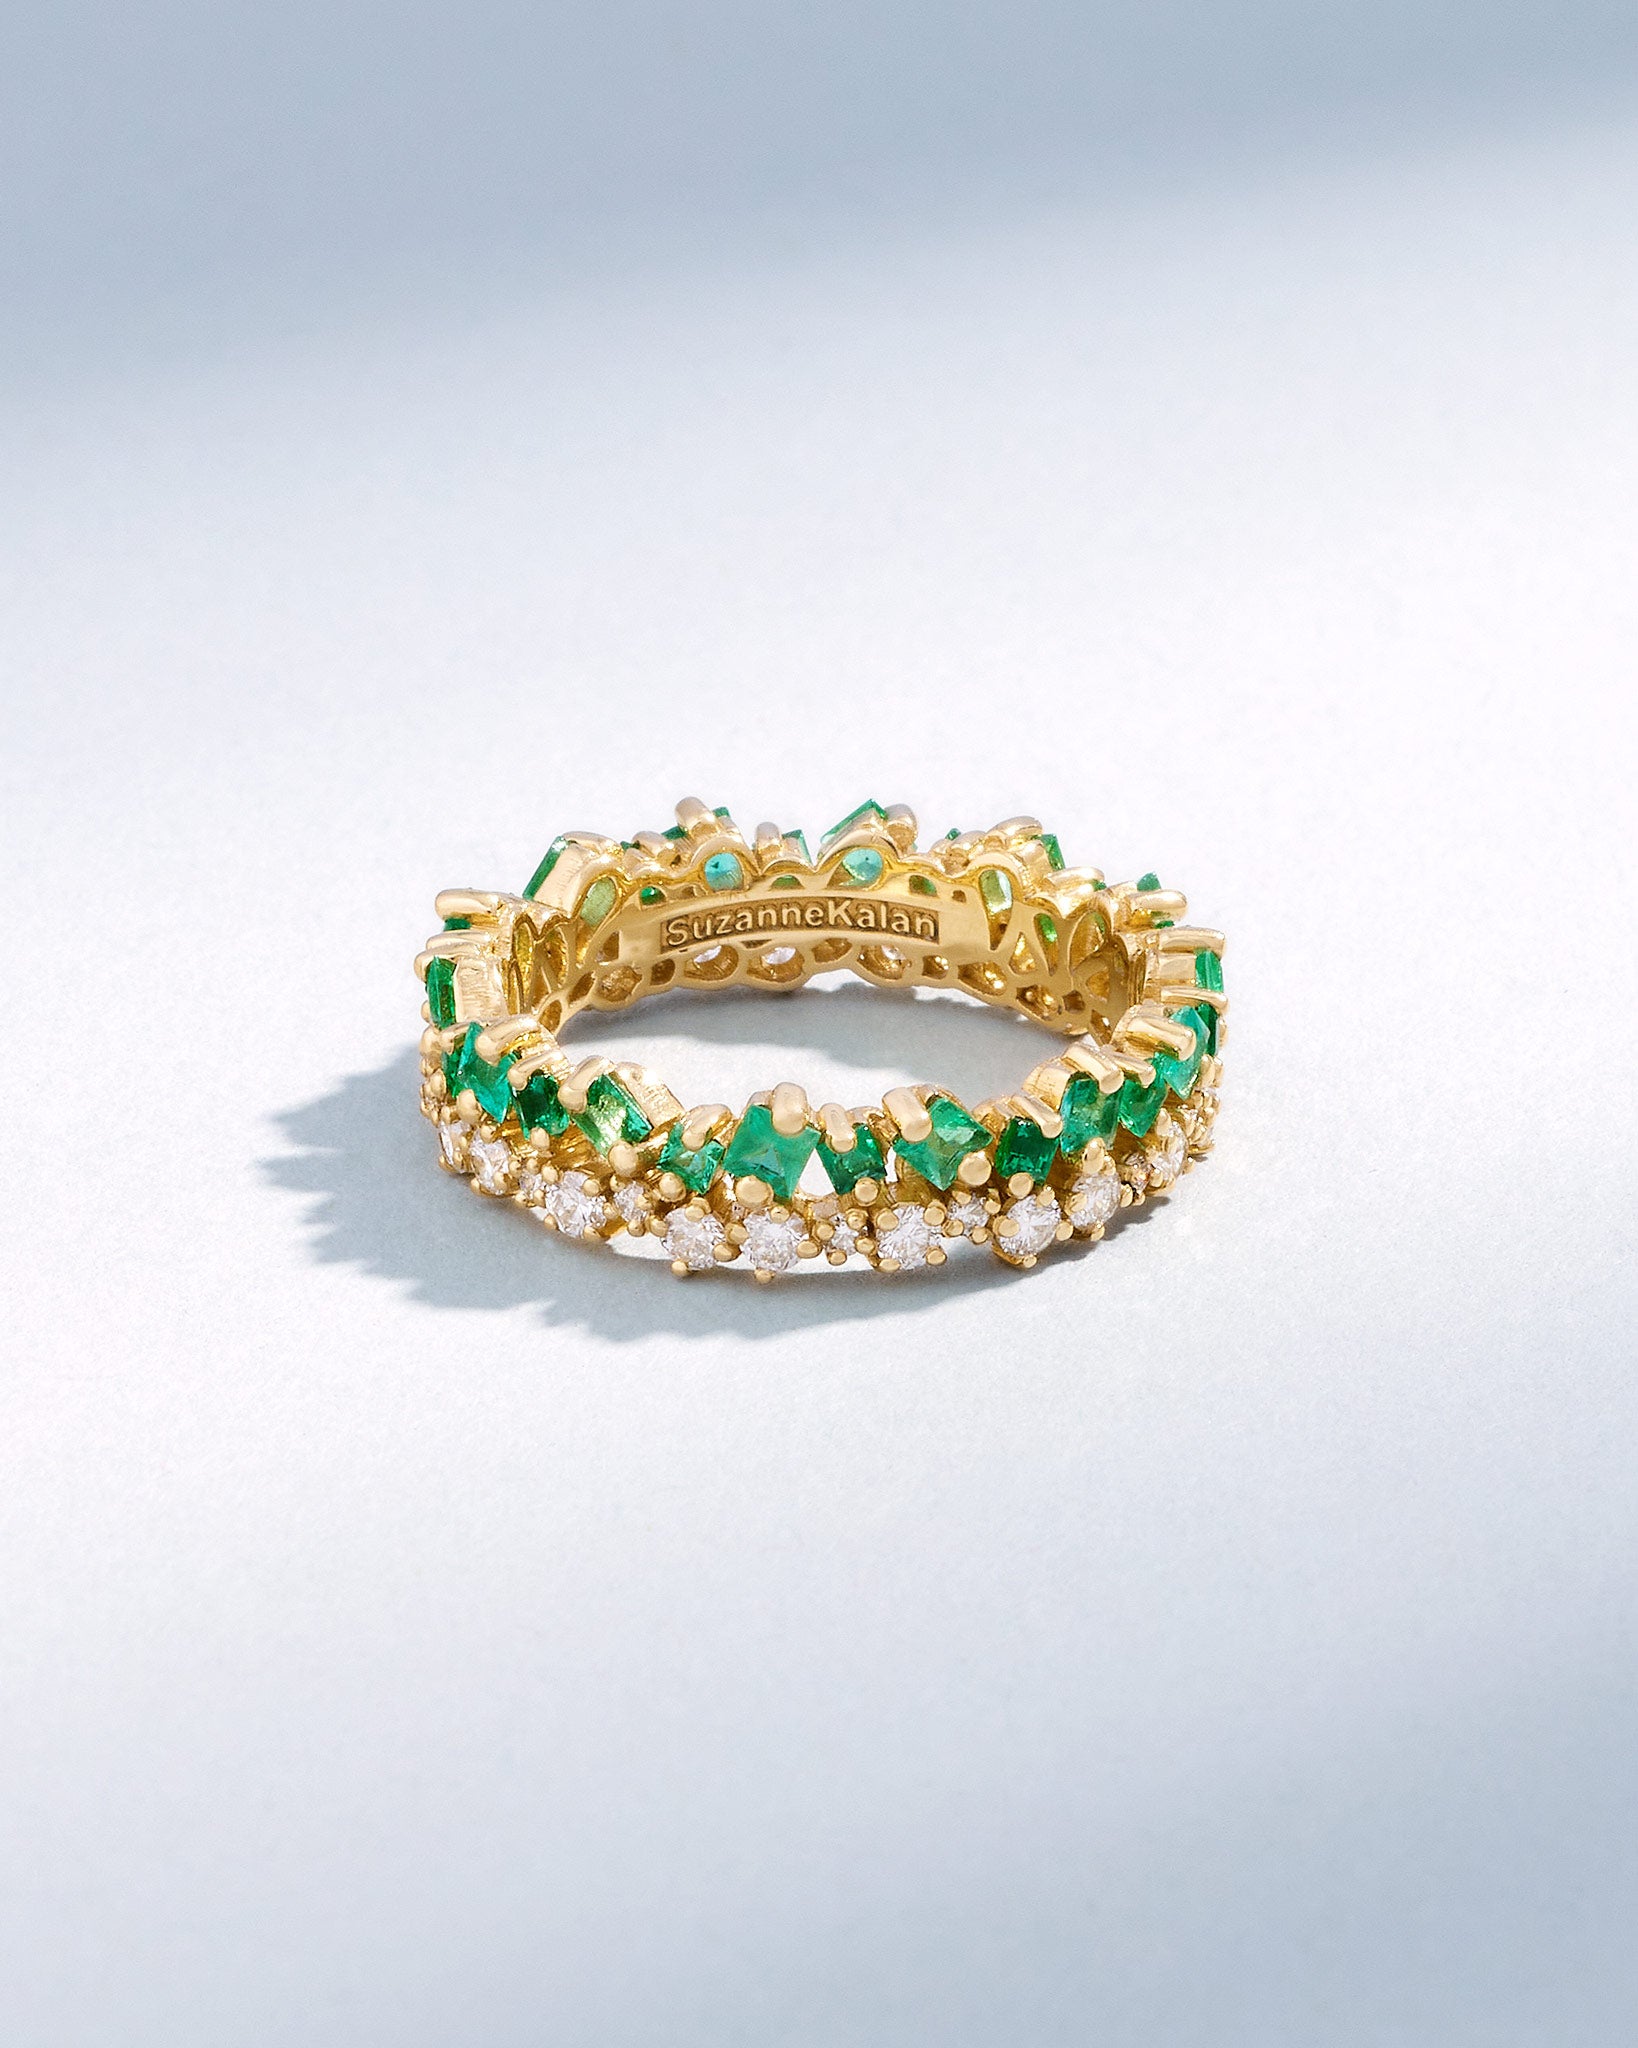 Suzanne Kalan Princess Short Stack Emerald Eternity Band in 18k yellow gold